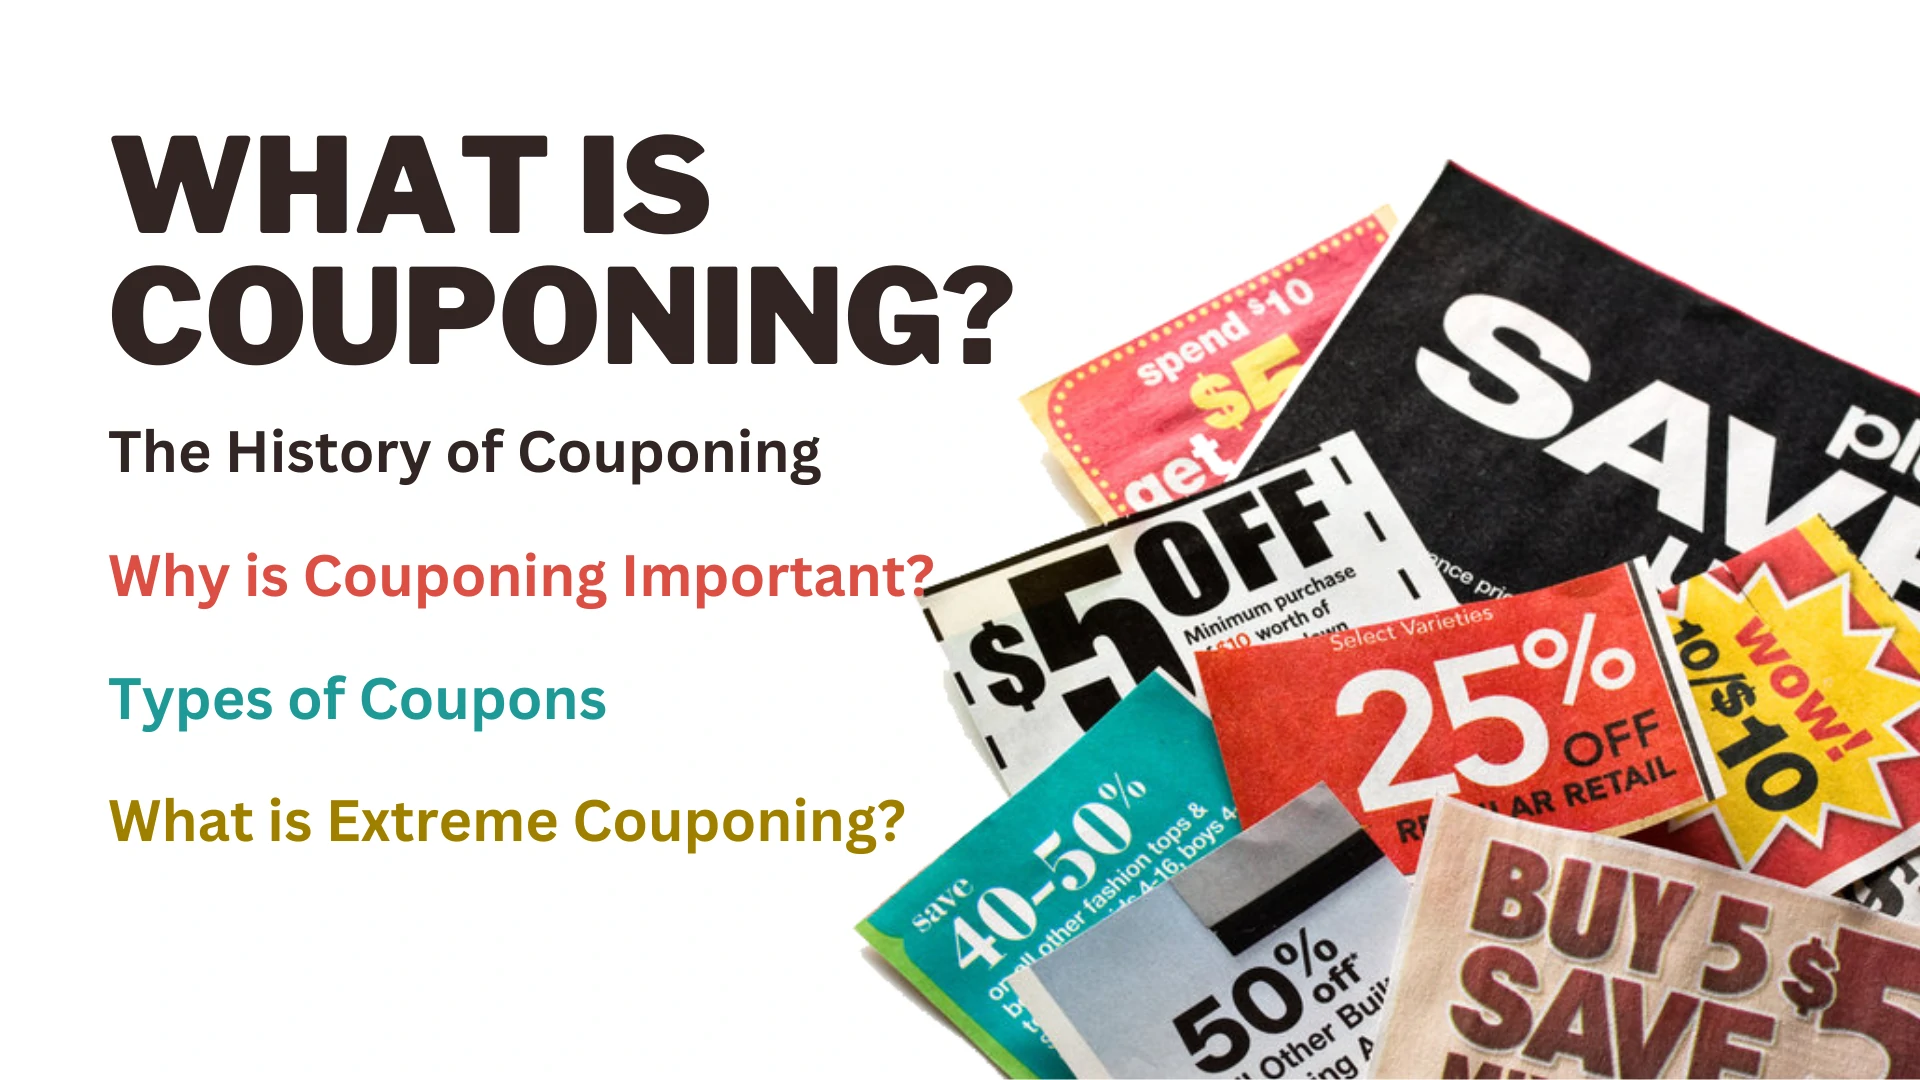 What Is Couponing?